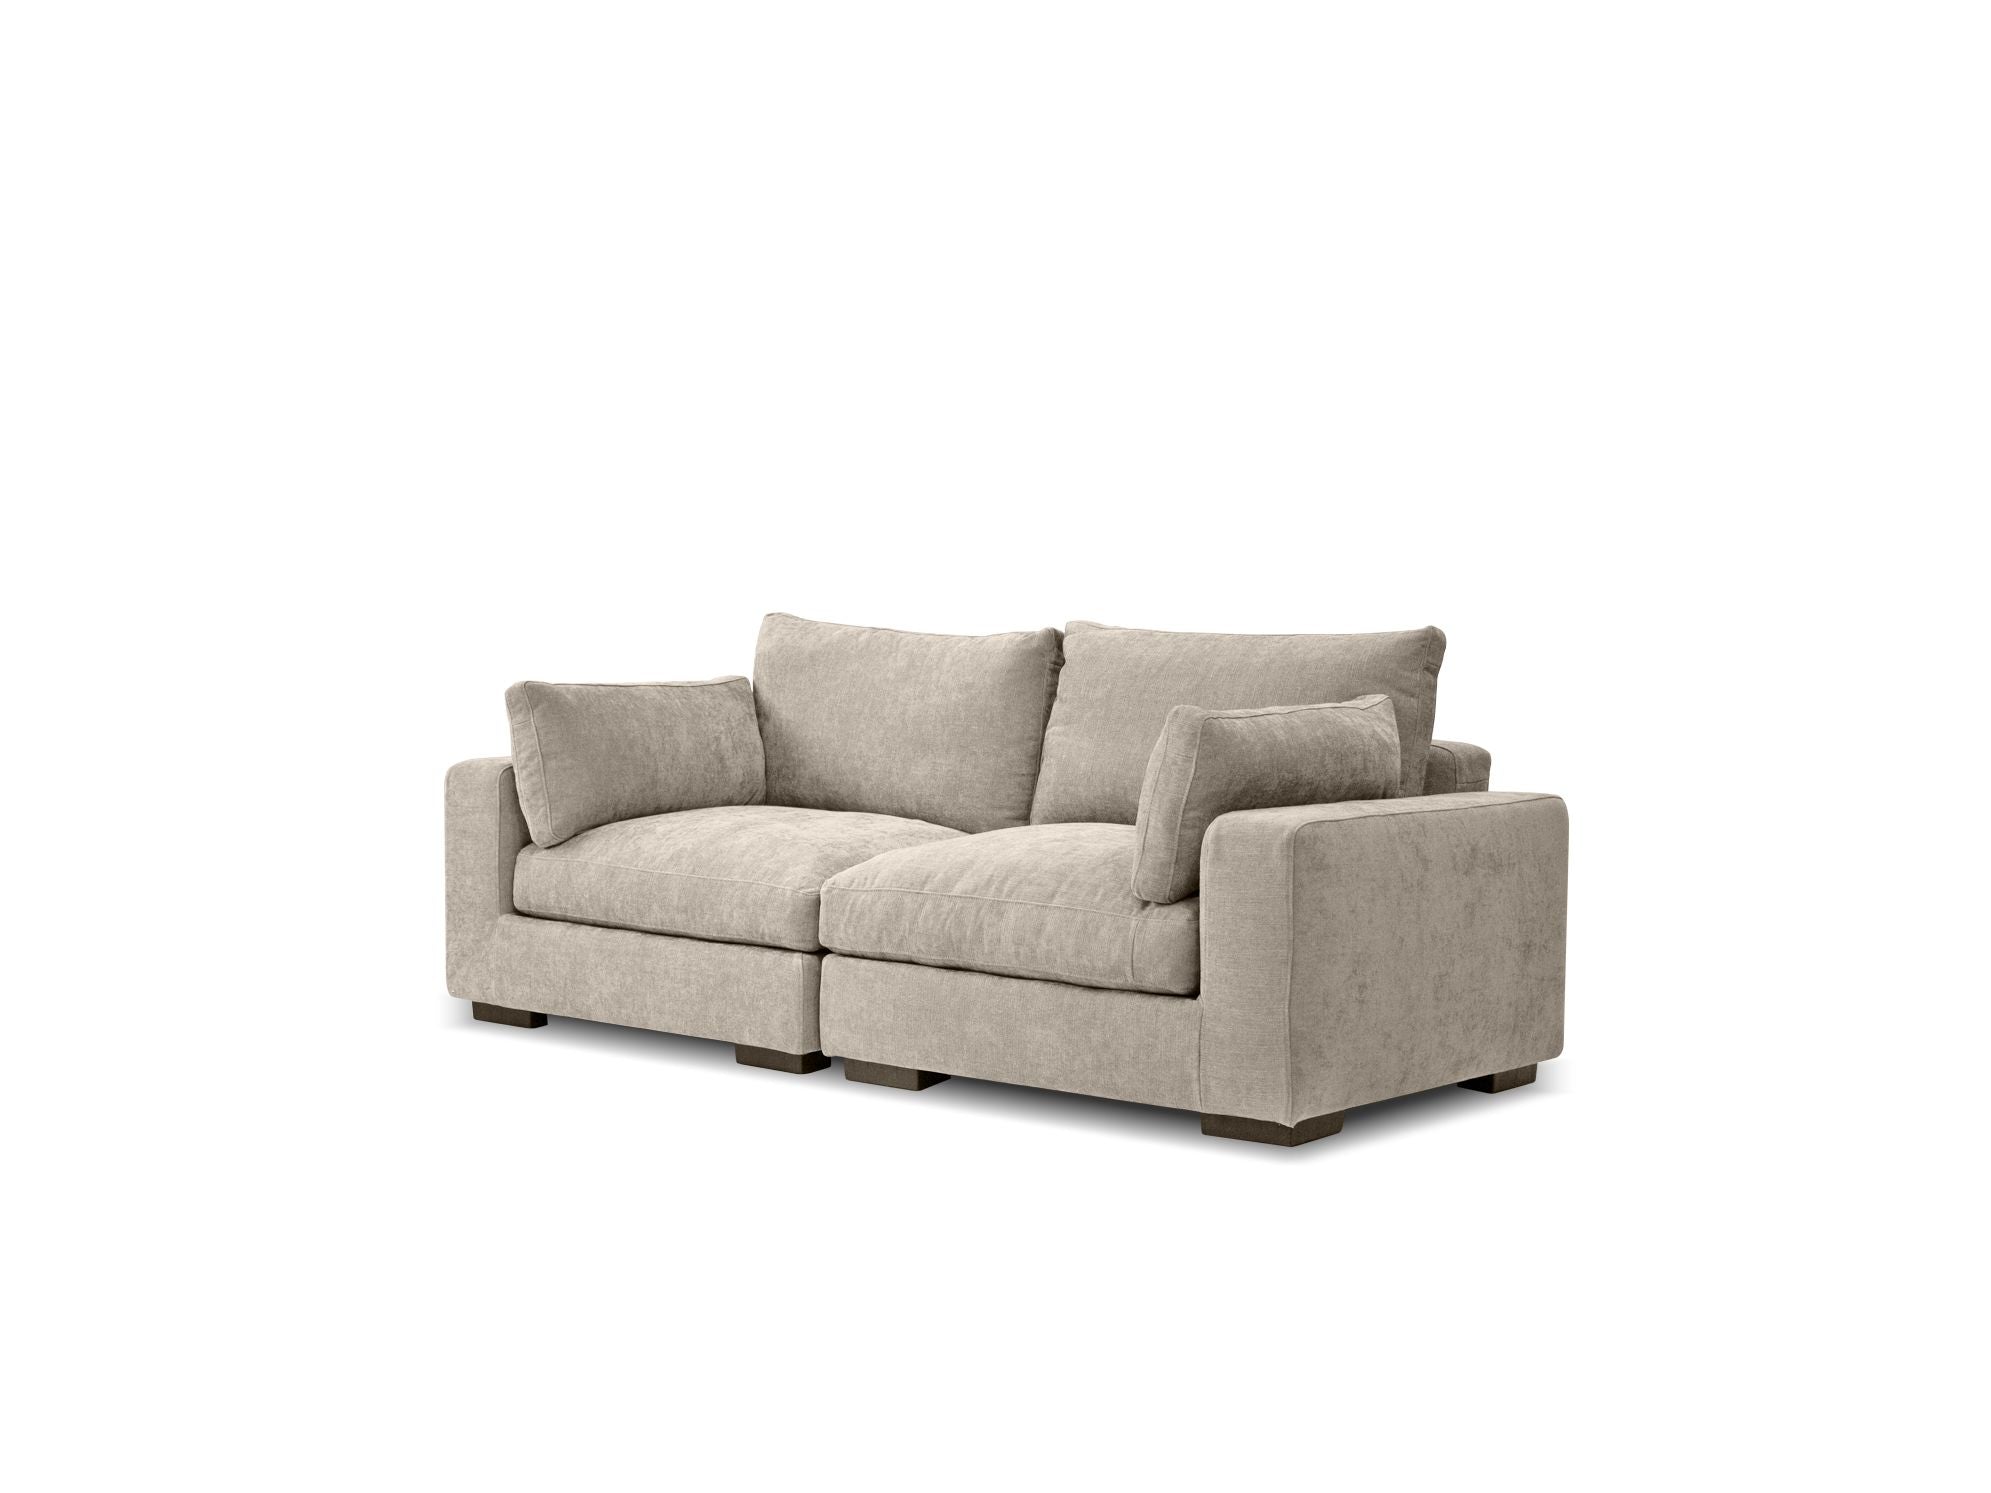 ONZA Fabric Loveseat in Oyster